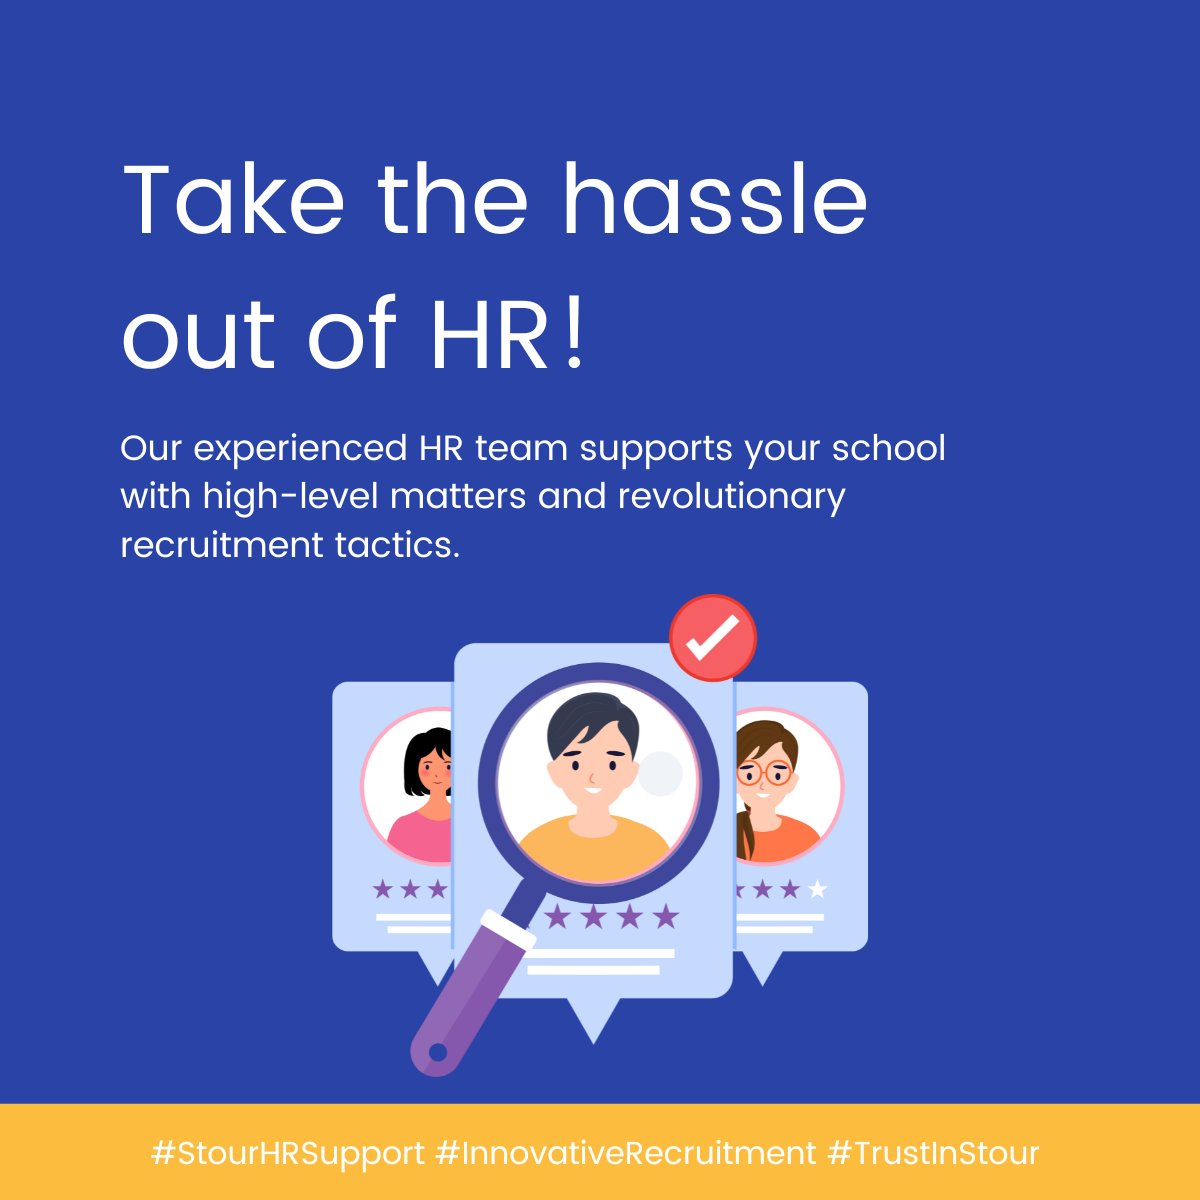 Our experienced HR team supports your school with high-level matters and revolutionary recruitment tactics.
Take the hassle out of HR!

#StourHRSupport #InnovativeRecruitment #TrustInStour 
For more info visit - thestouracademytrust.org.uk